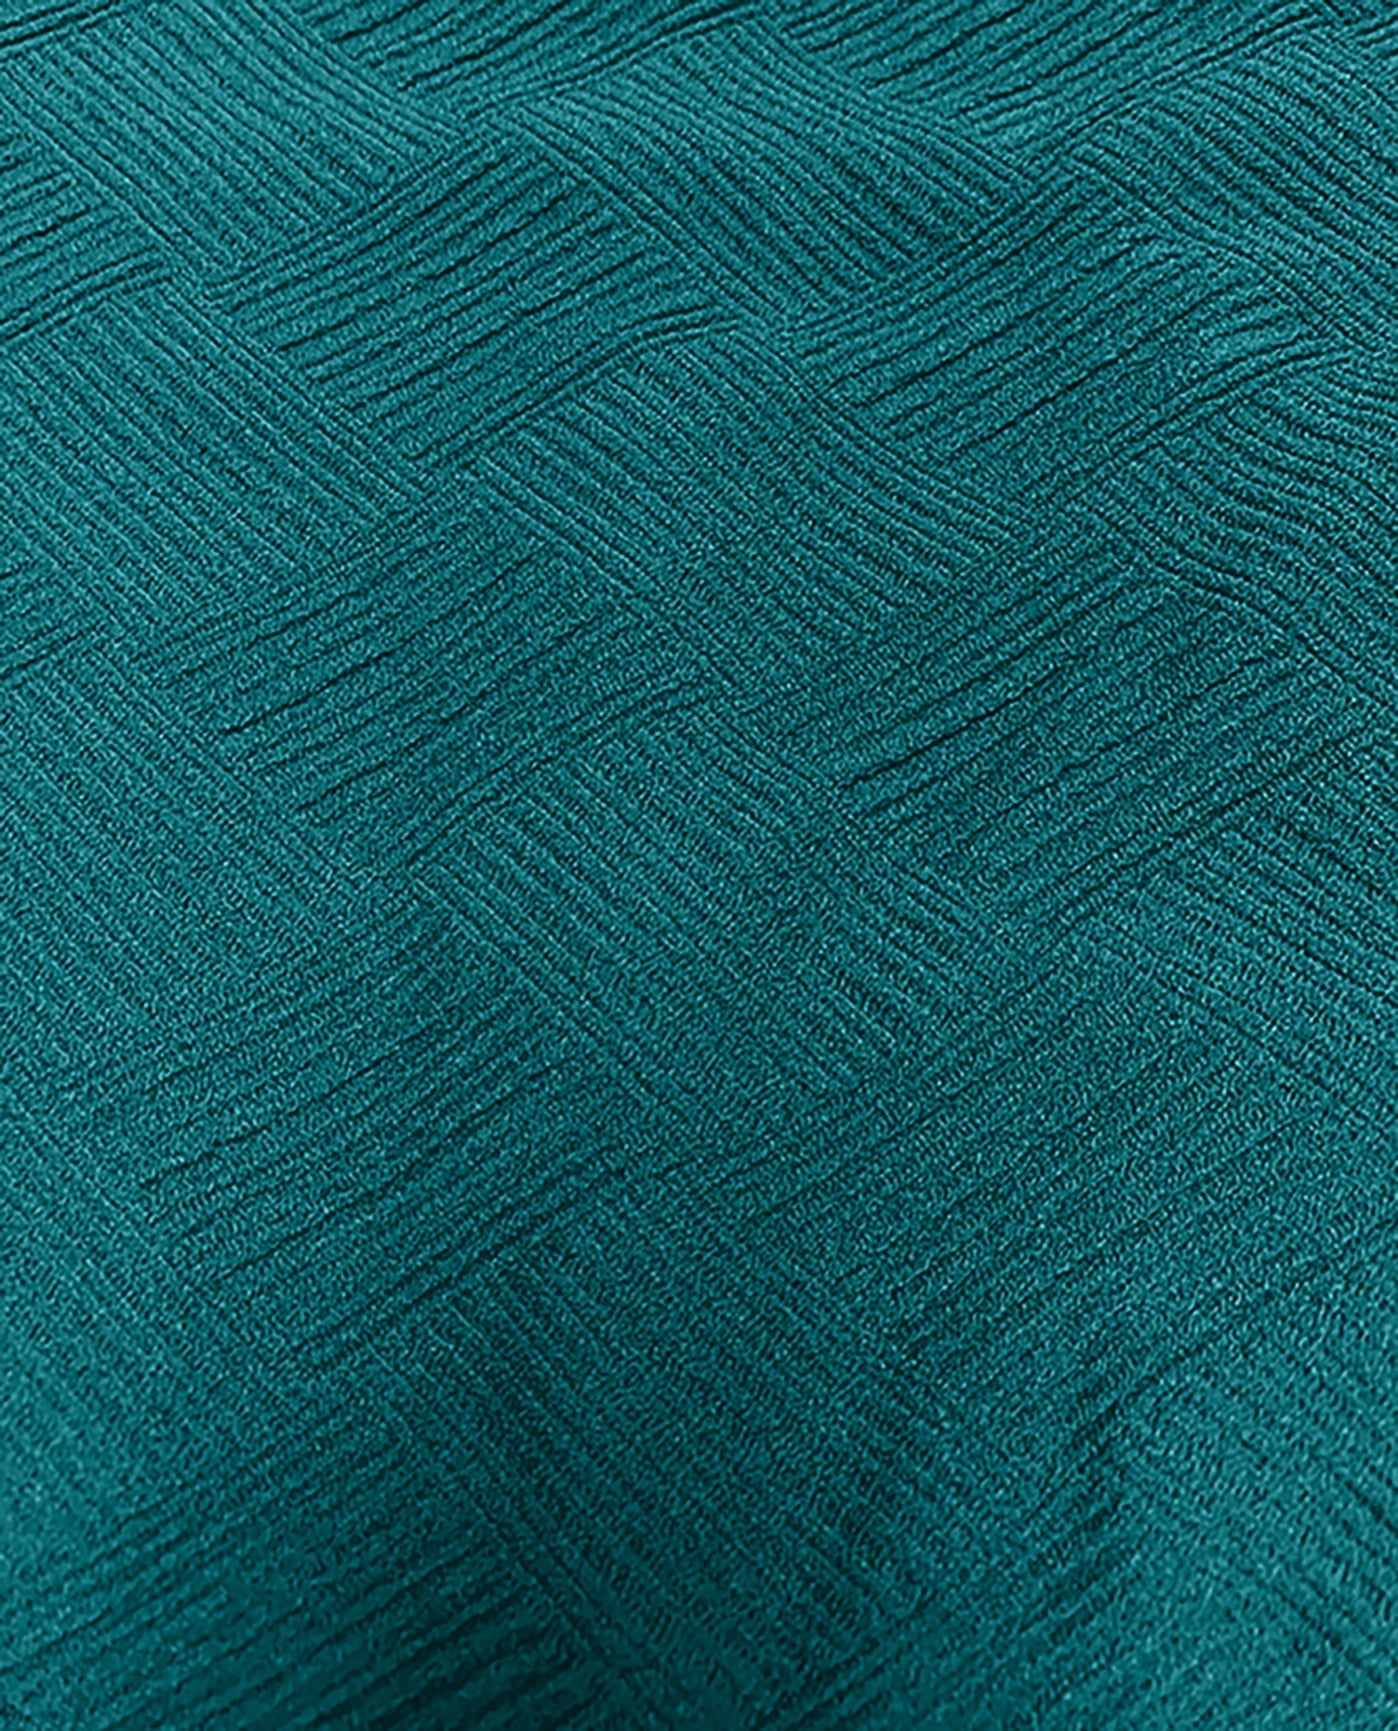 FABRIC SWATCH VIEW OF CHLORINE RESISTANT AQUAMORE SOLID SIGNATURE TEXTURED HIGH NECK ONE PIECE SWIMSUIT | 010L AQS SIGNATURE DEEP OCEAN